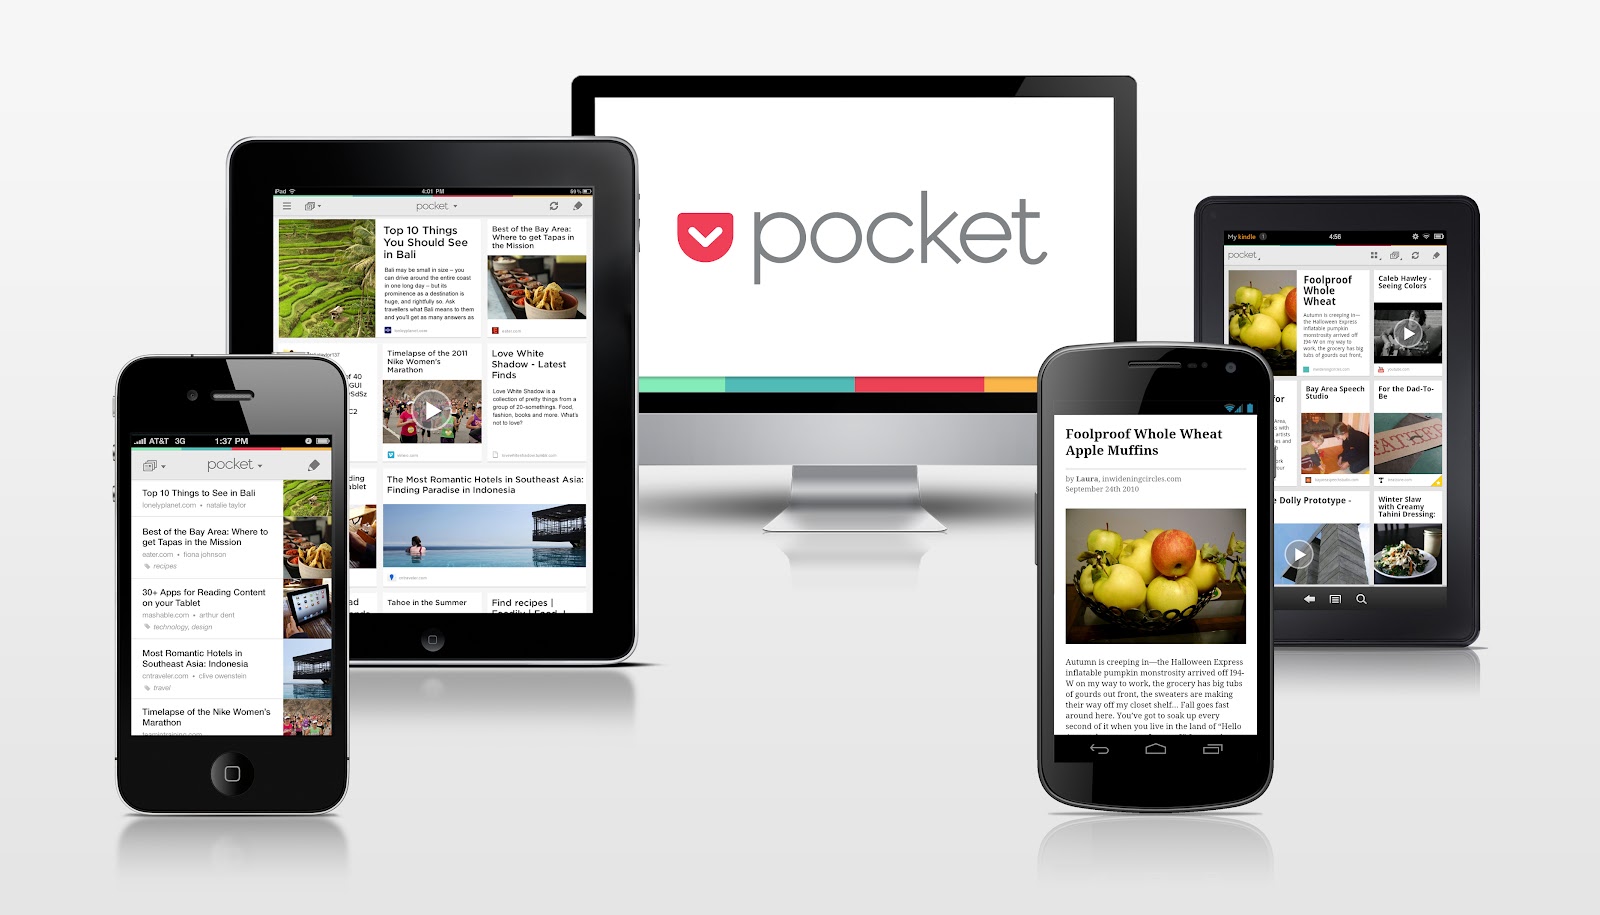 save time by using pocket to read while you commute to work, or just before bed